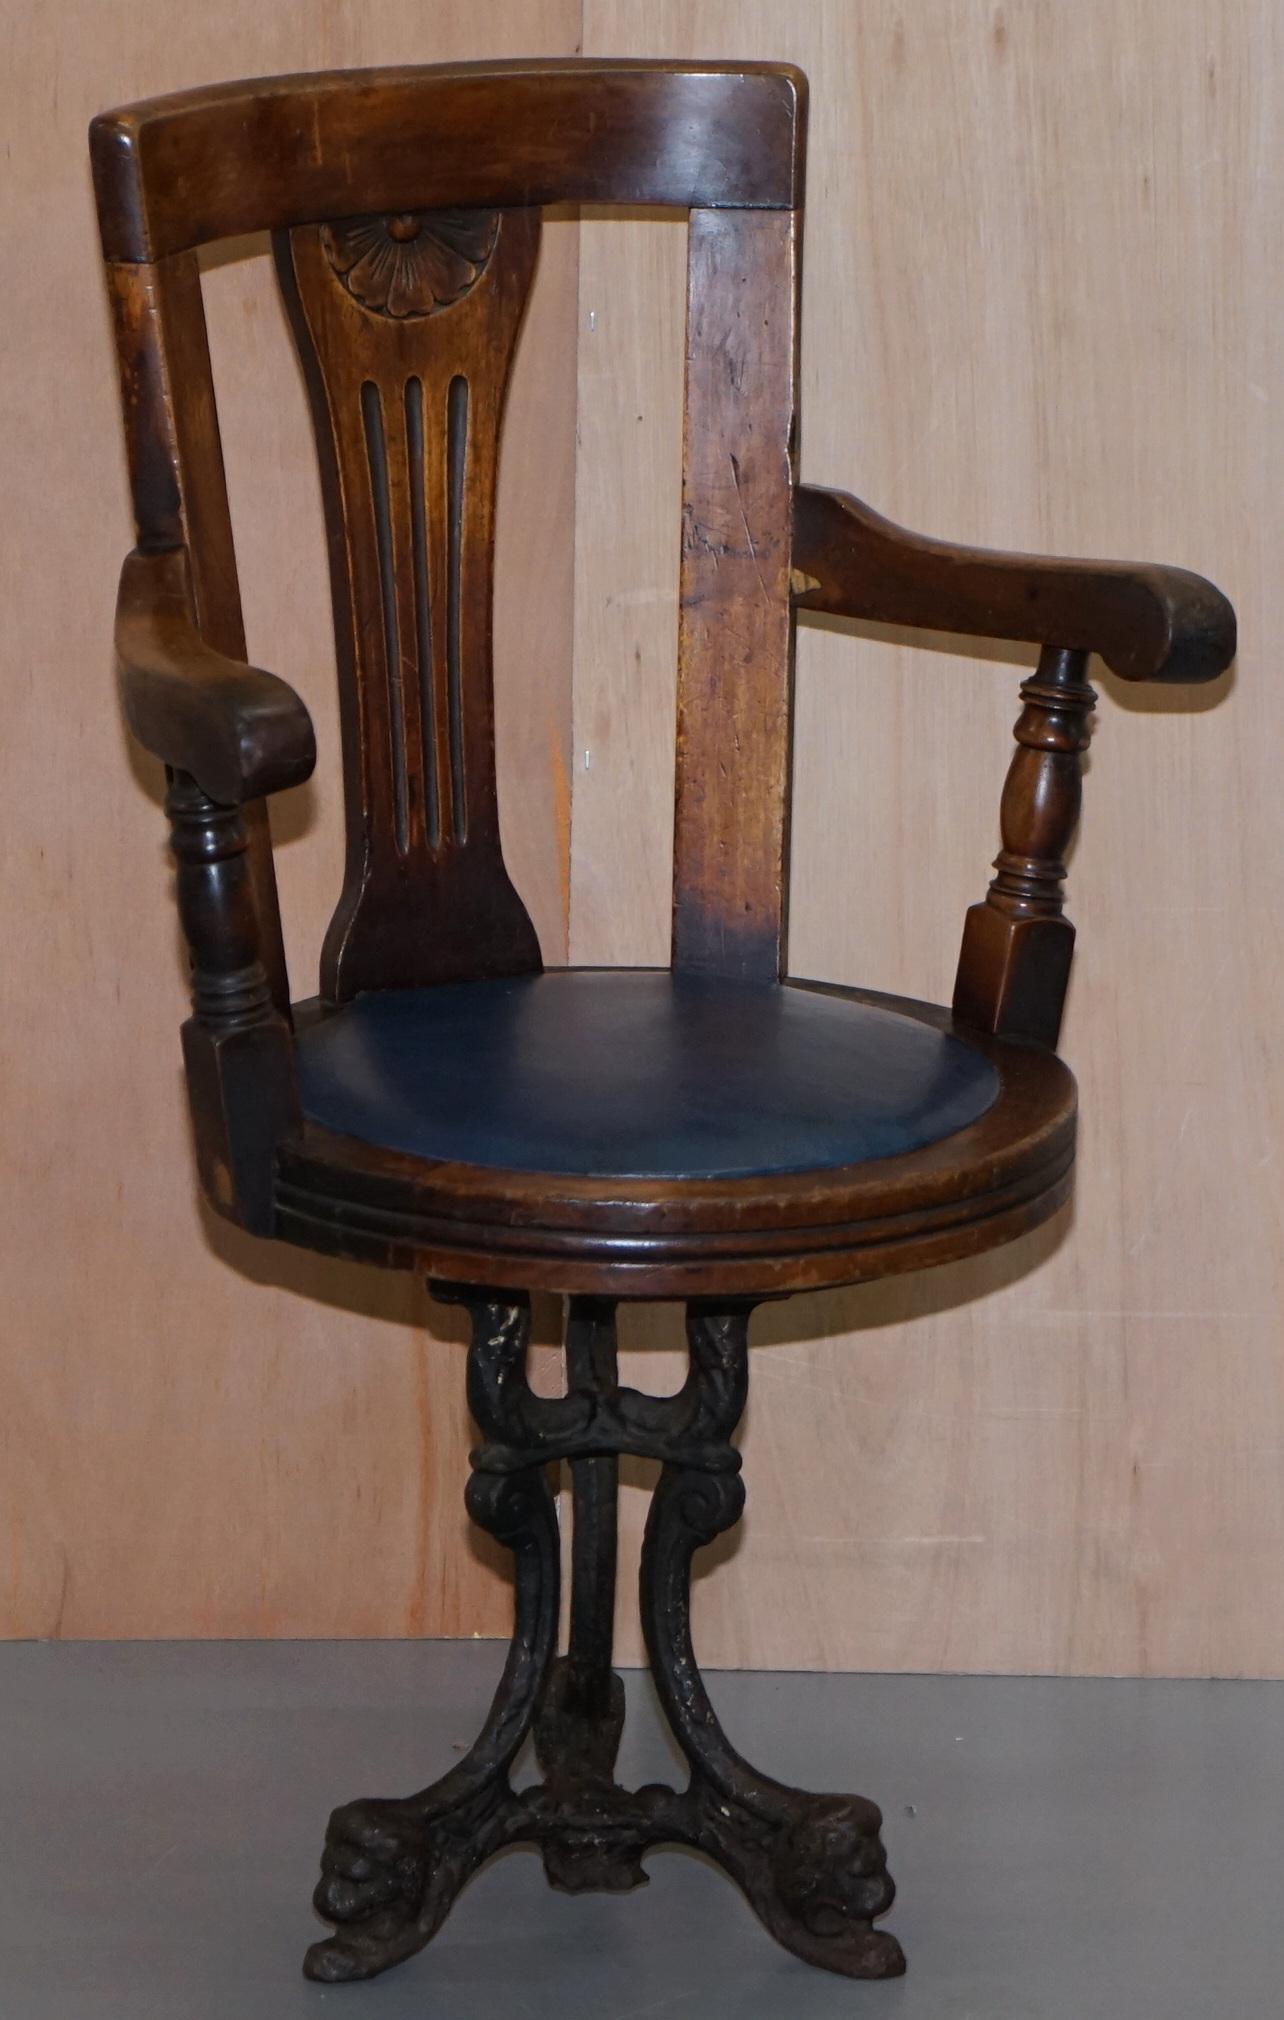 We are delighted to offer for sale this absolutely stunning mid Victorian Ships Swivel armchair on a solid cast iron base with Lion head detailing

A very good looking and decorative chair, the timber is Walnut, the seat base blue leather, and the